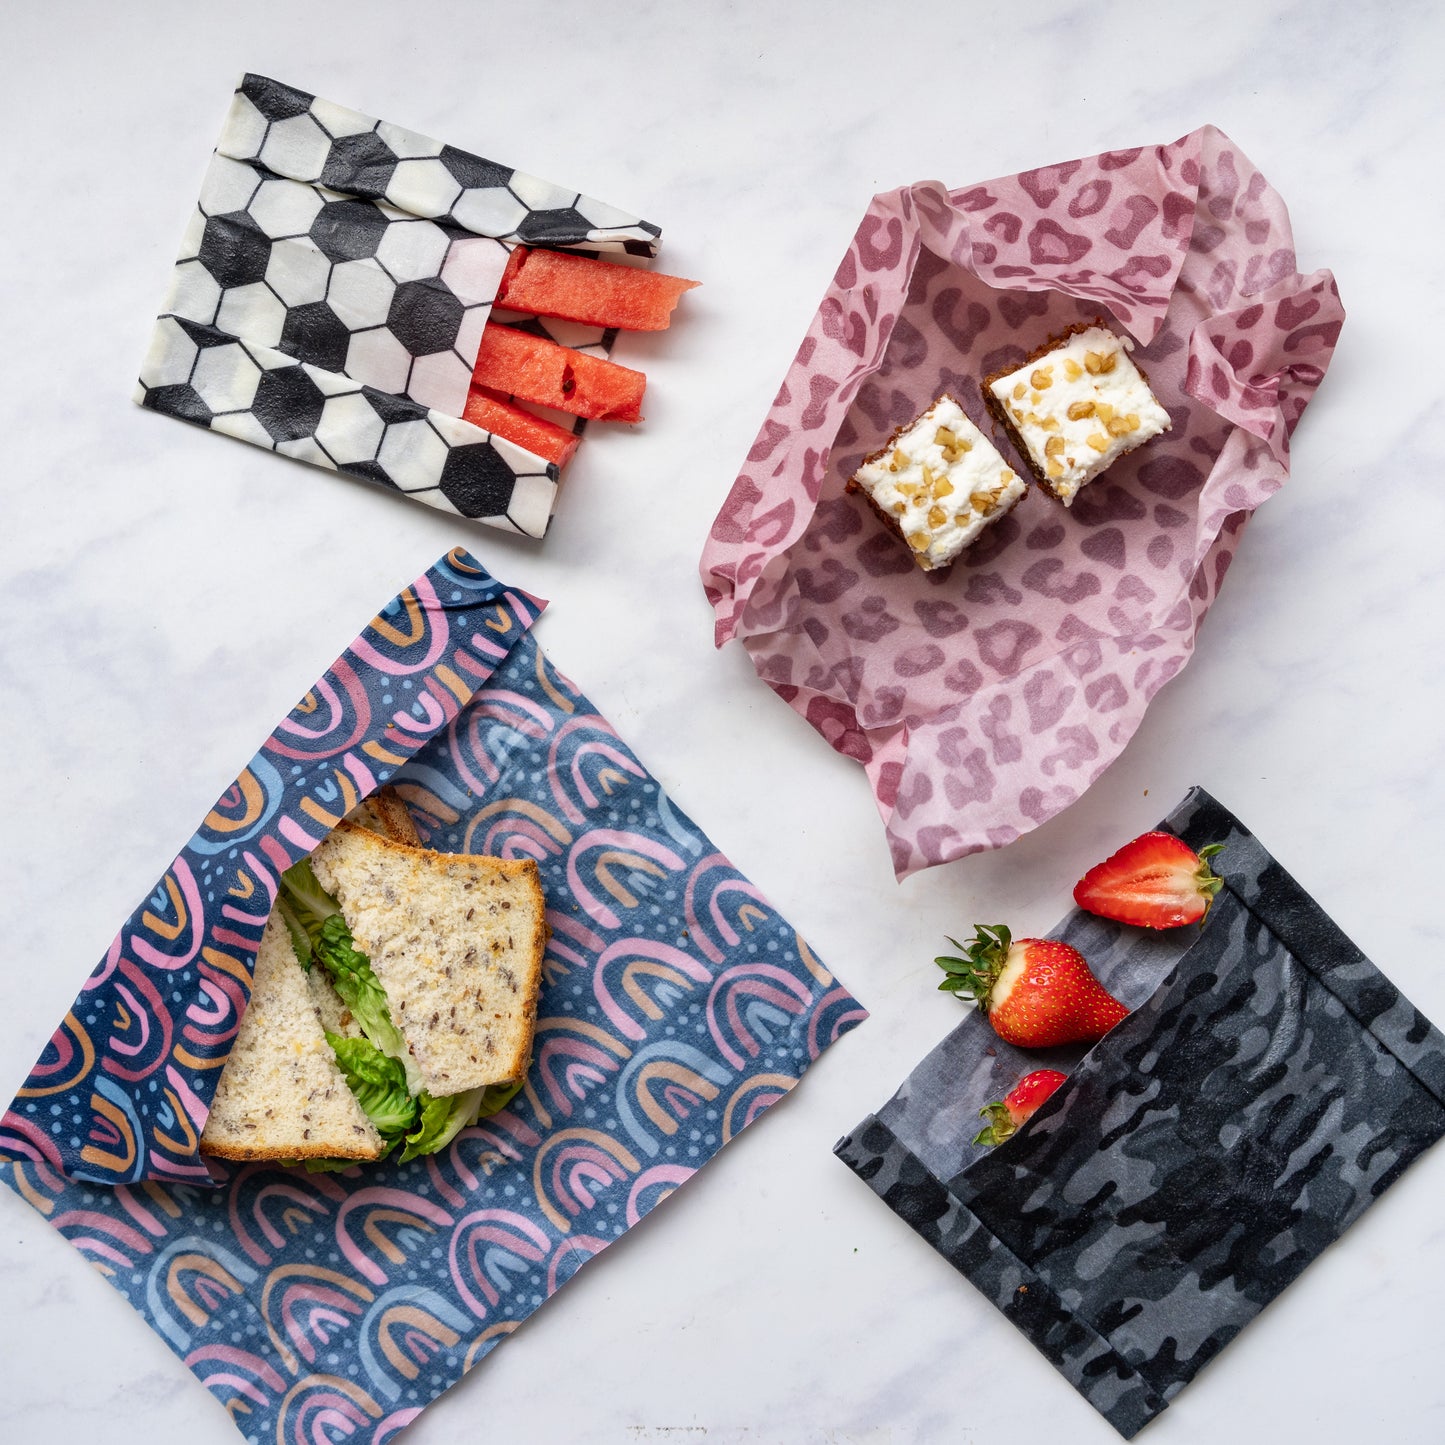 Beeswax Wrap by Little Lunch Box Co - Camo